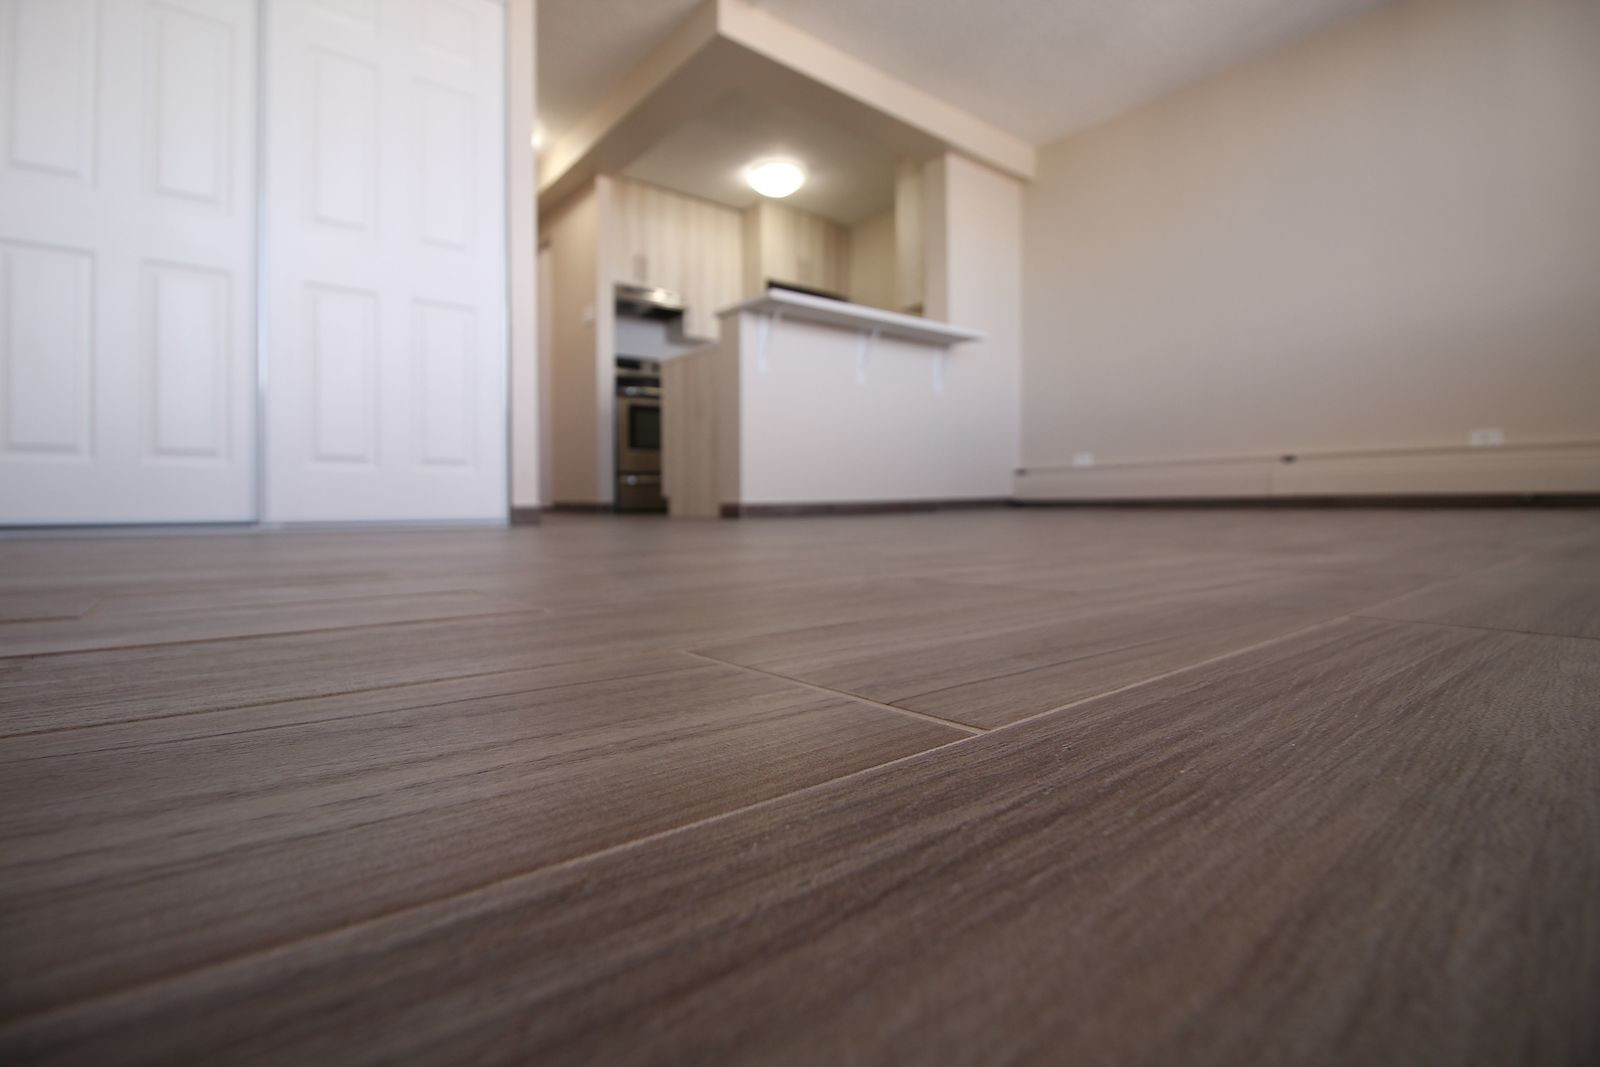 27 Unique Alberta Hardwood Flooring Reviews 2024 free download alberta hardwood flooring reviews of calgary apartment for rent downtown heart of downtown this clean within fully renovated studio bachelor suite